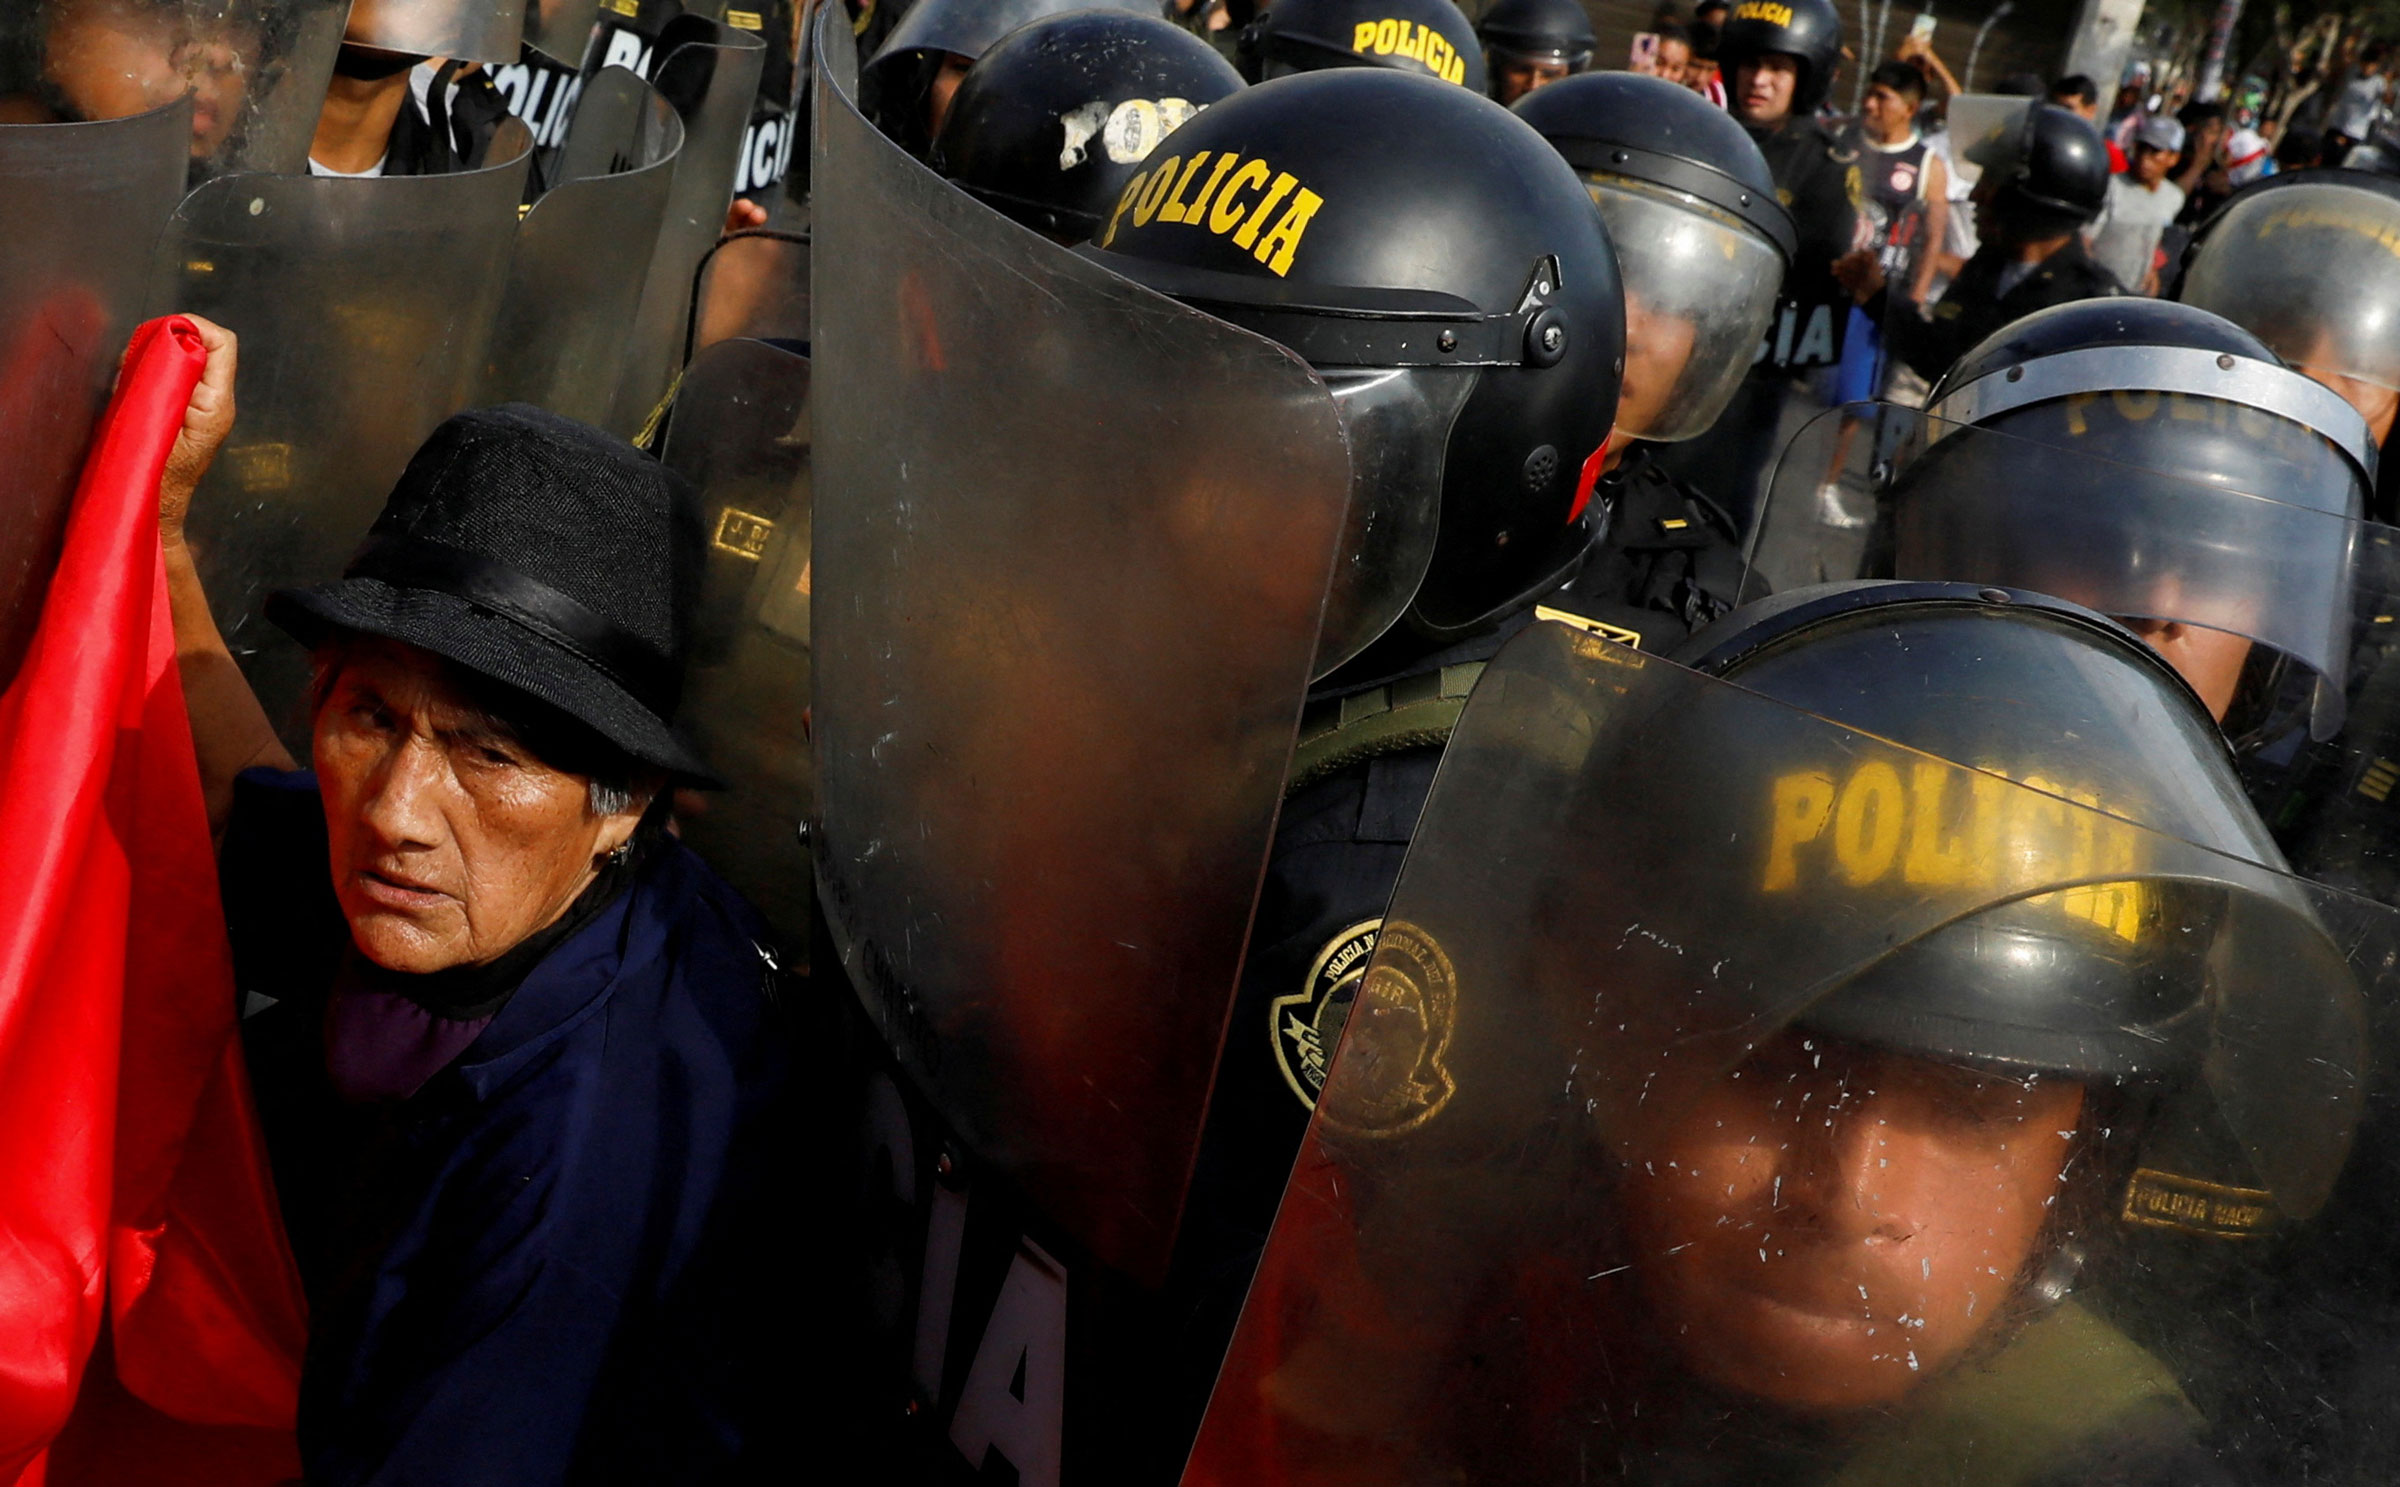 A protester interacts with police during the ‘Take over Lima’ march to demonstrate against Peru’s President Dina Boluarte, following the ousting and arrest of former President Pedro Castillo